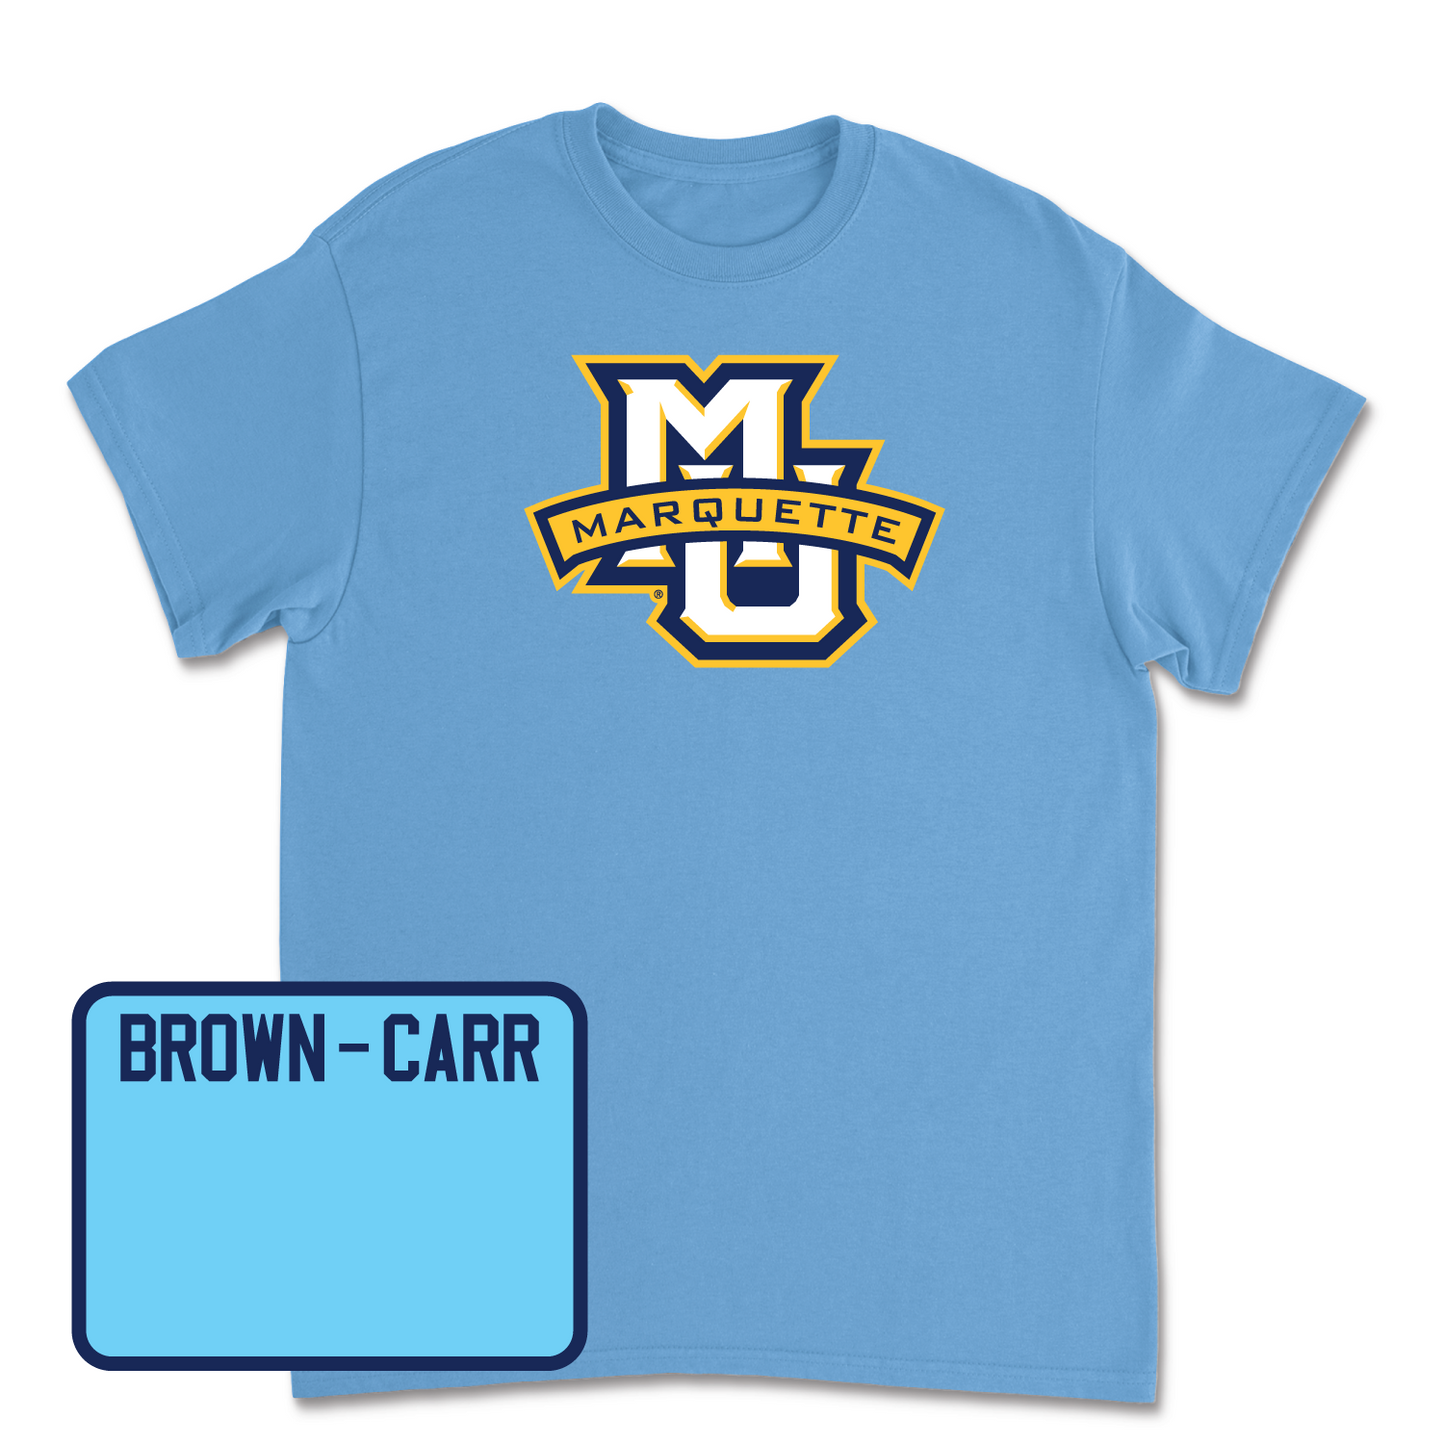 Championship Blue Track & Field Marquette Tee 2 Youth Large / Siani Brown-Carr